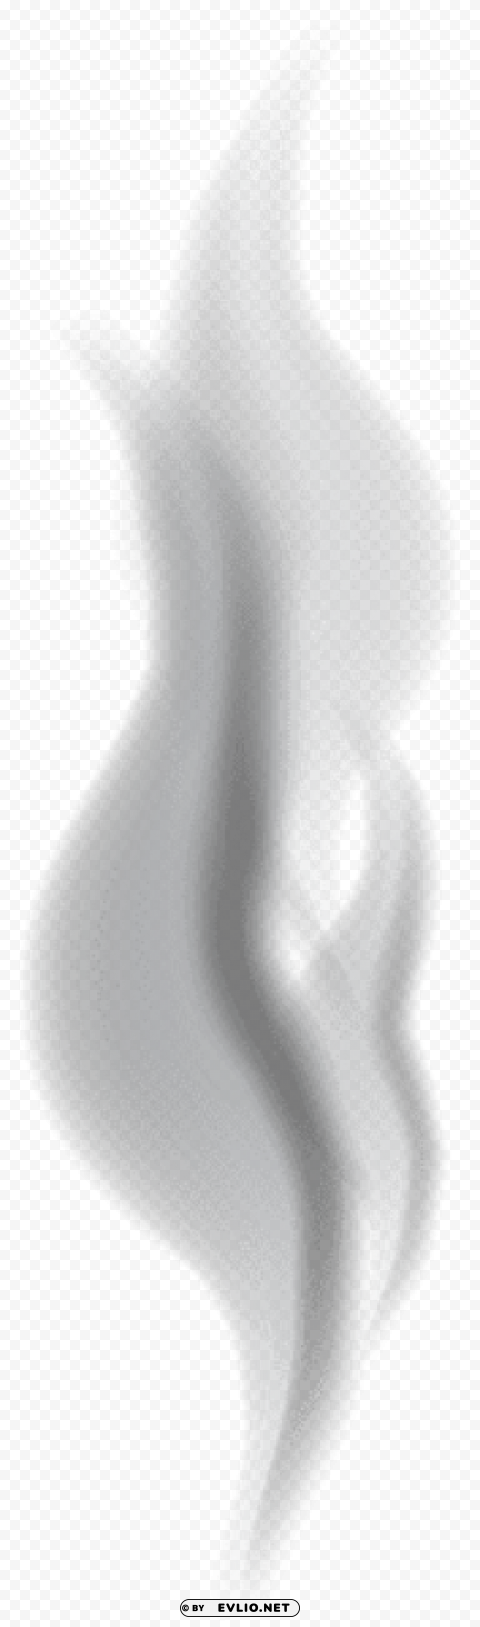 Smoke Isolated Subject On HighQuality Transparent PNG